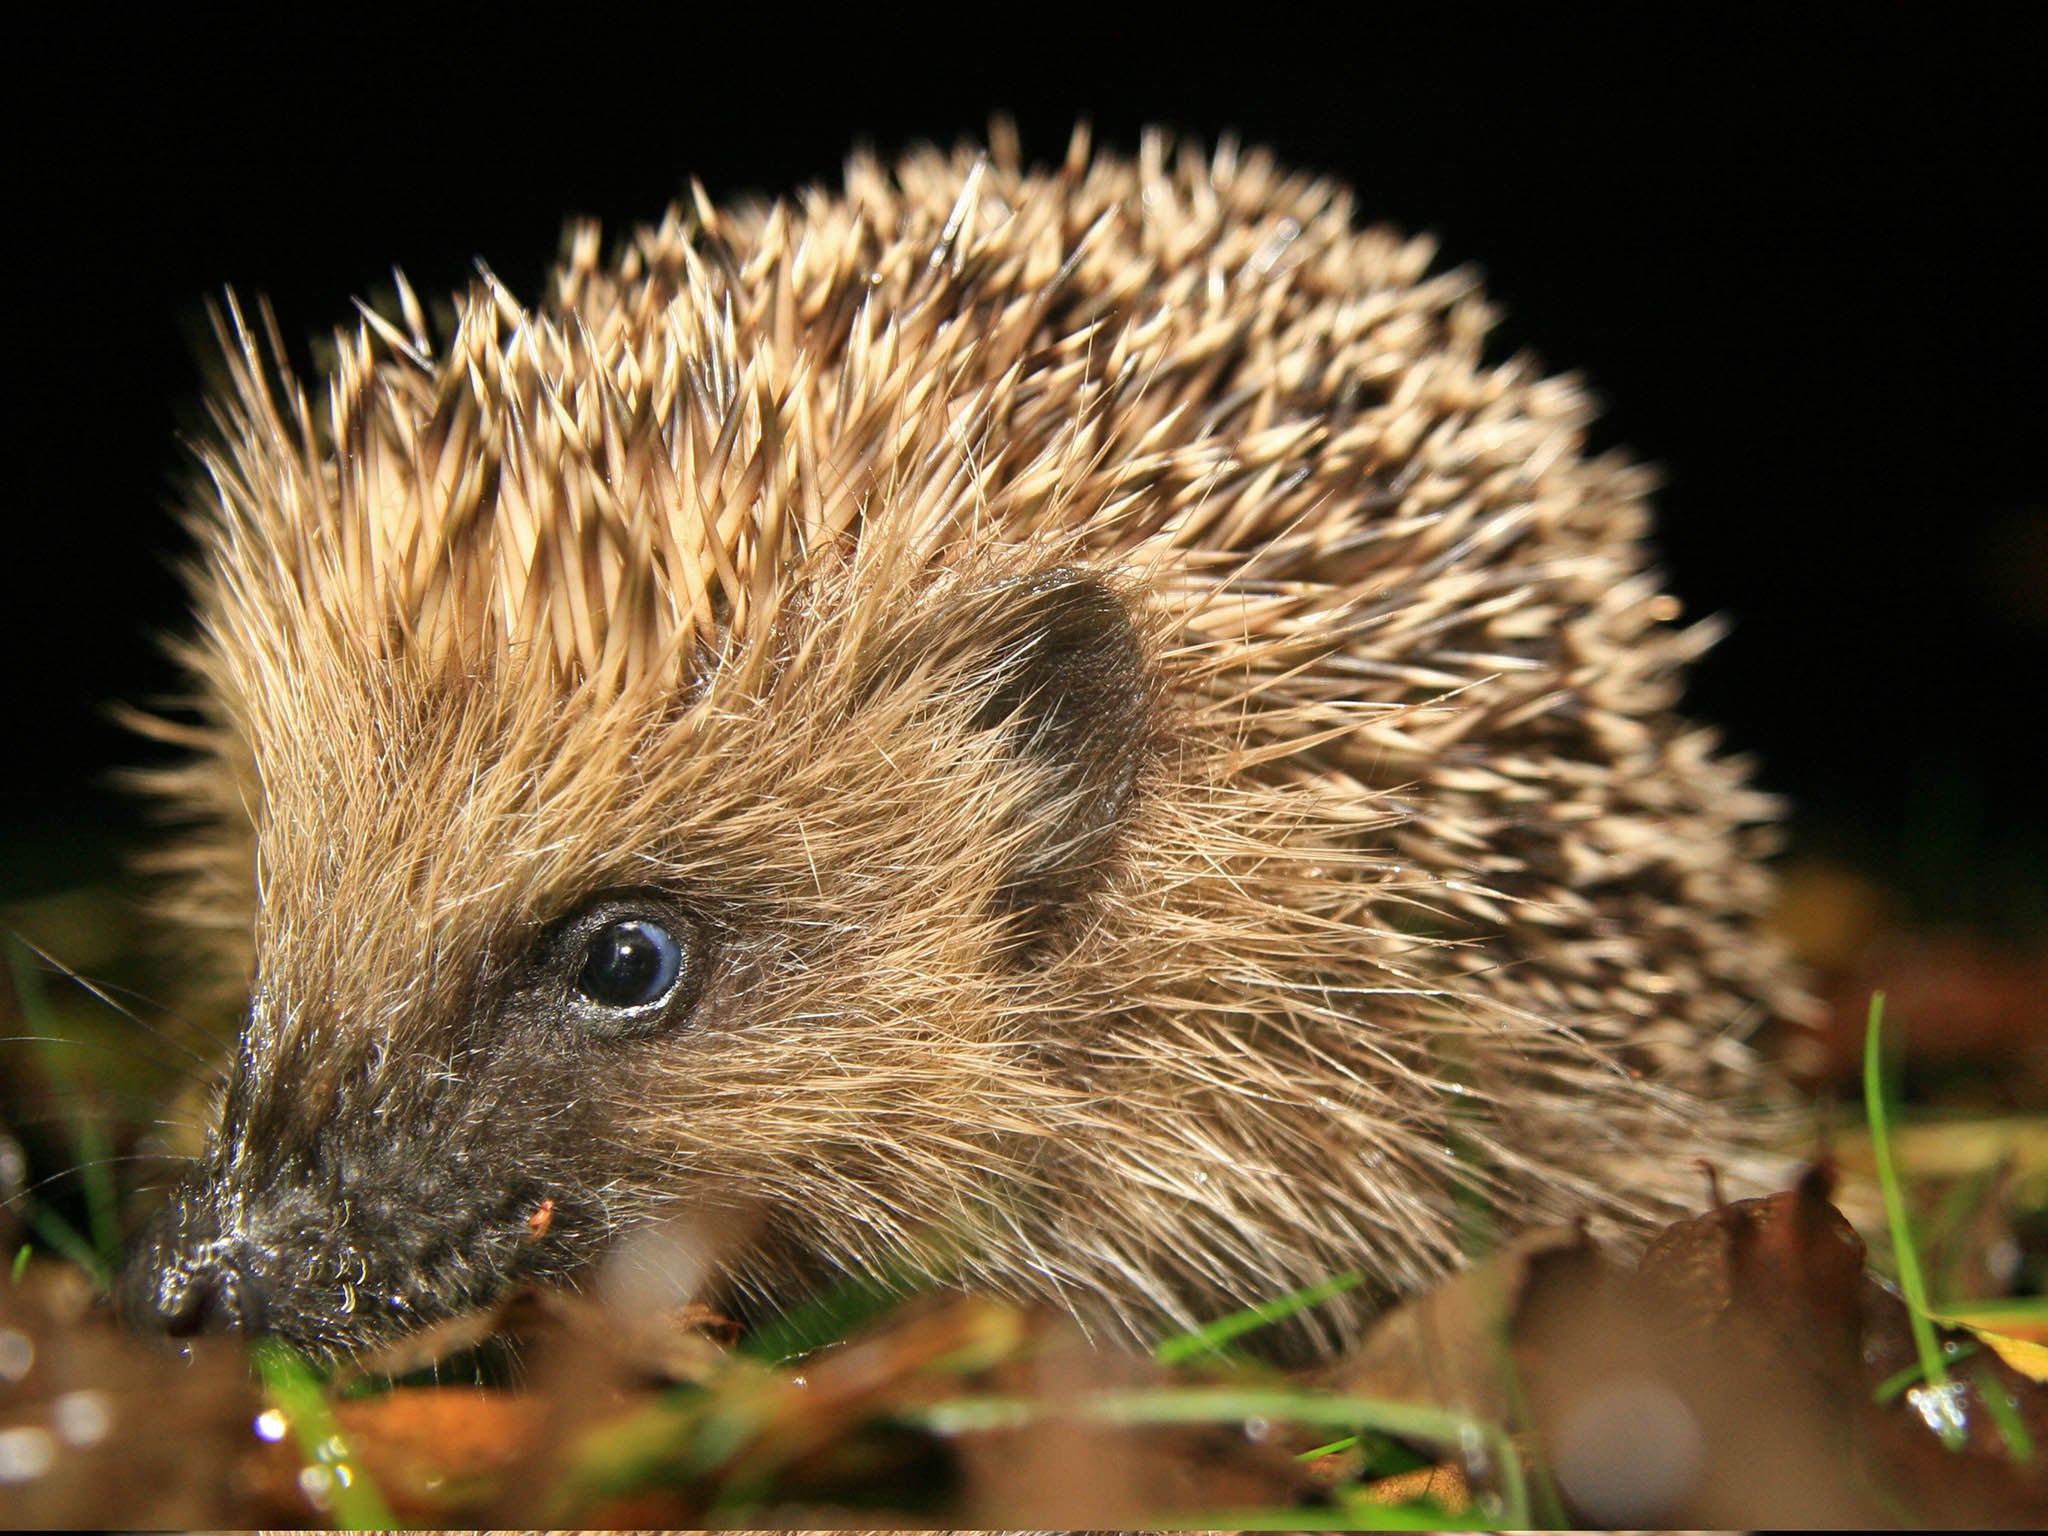 Hedgehog numbers have dropped by more than half in rural areas